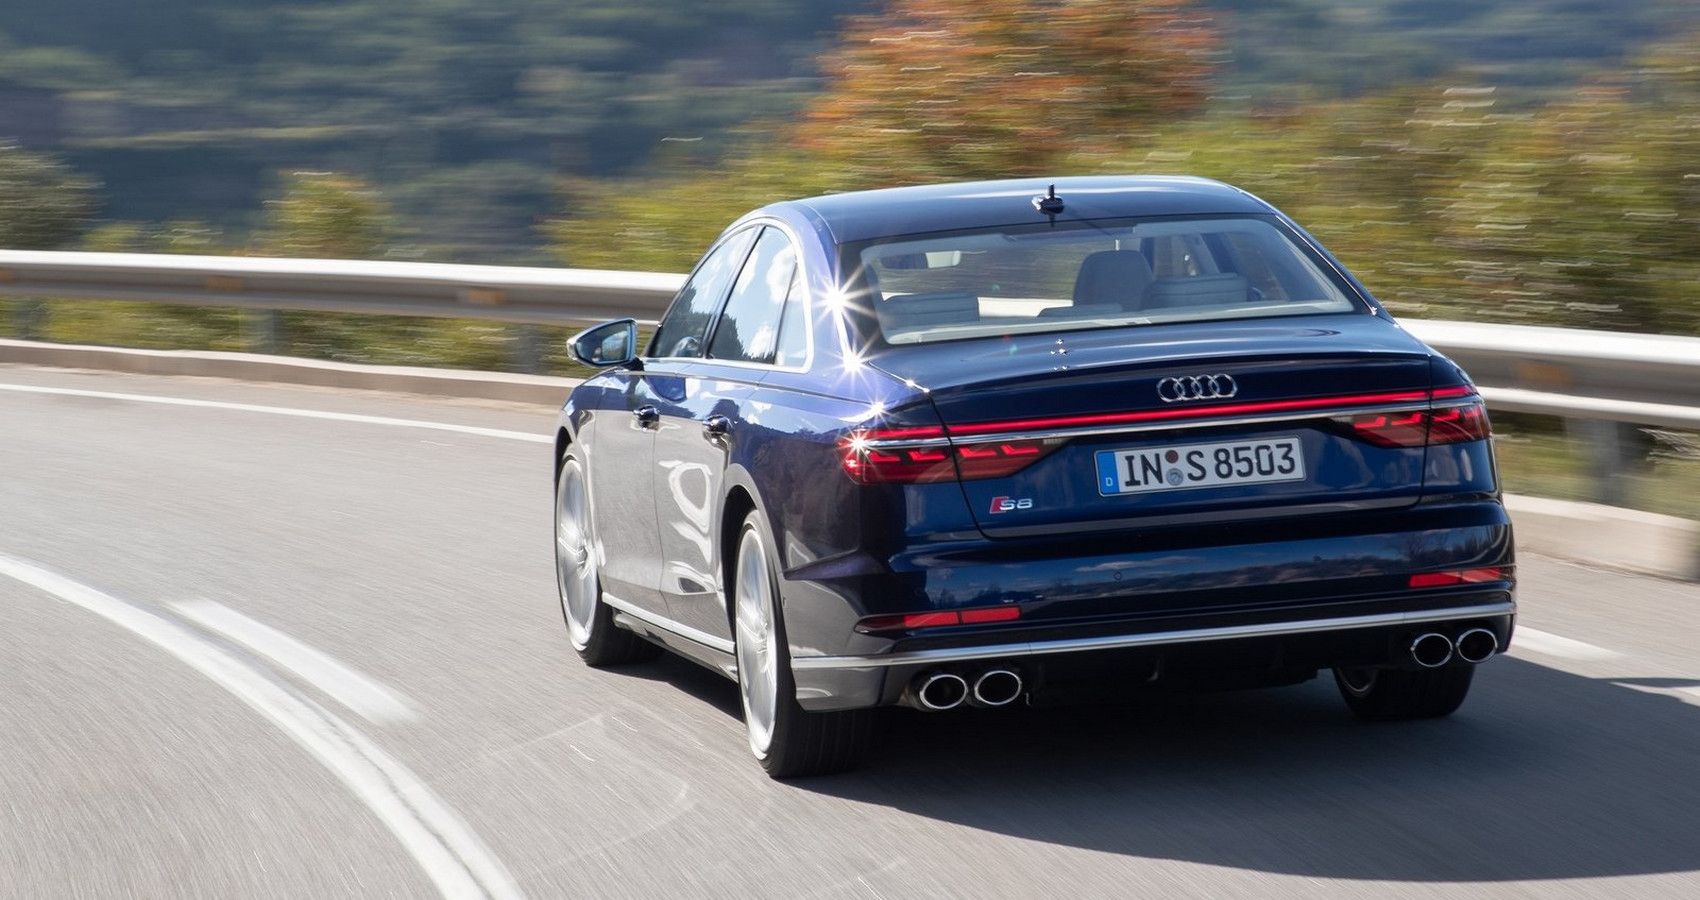 Blue Audi S8 on the road